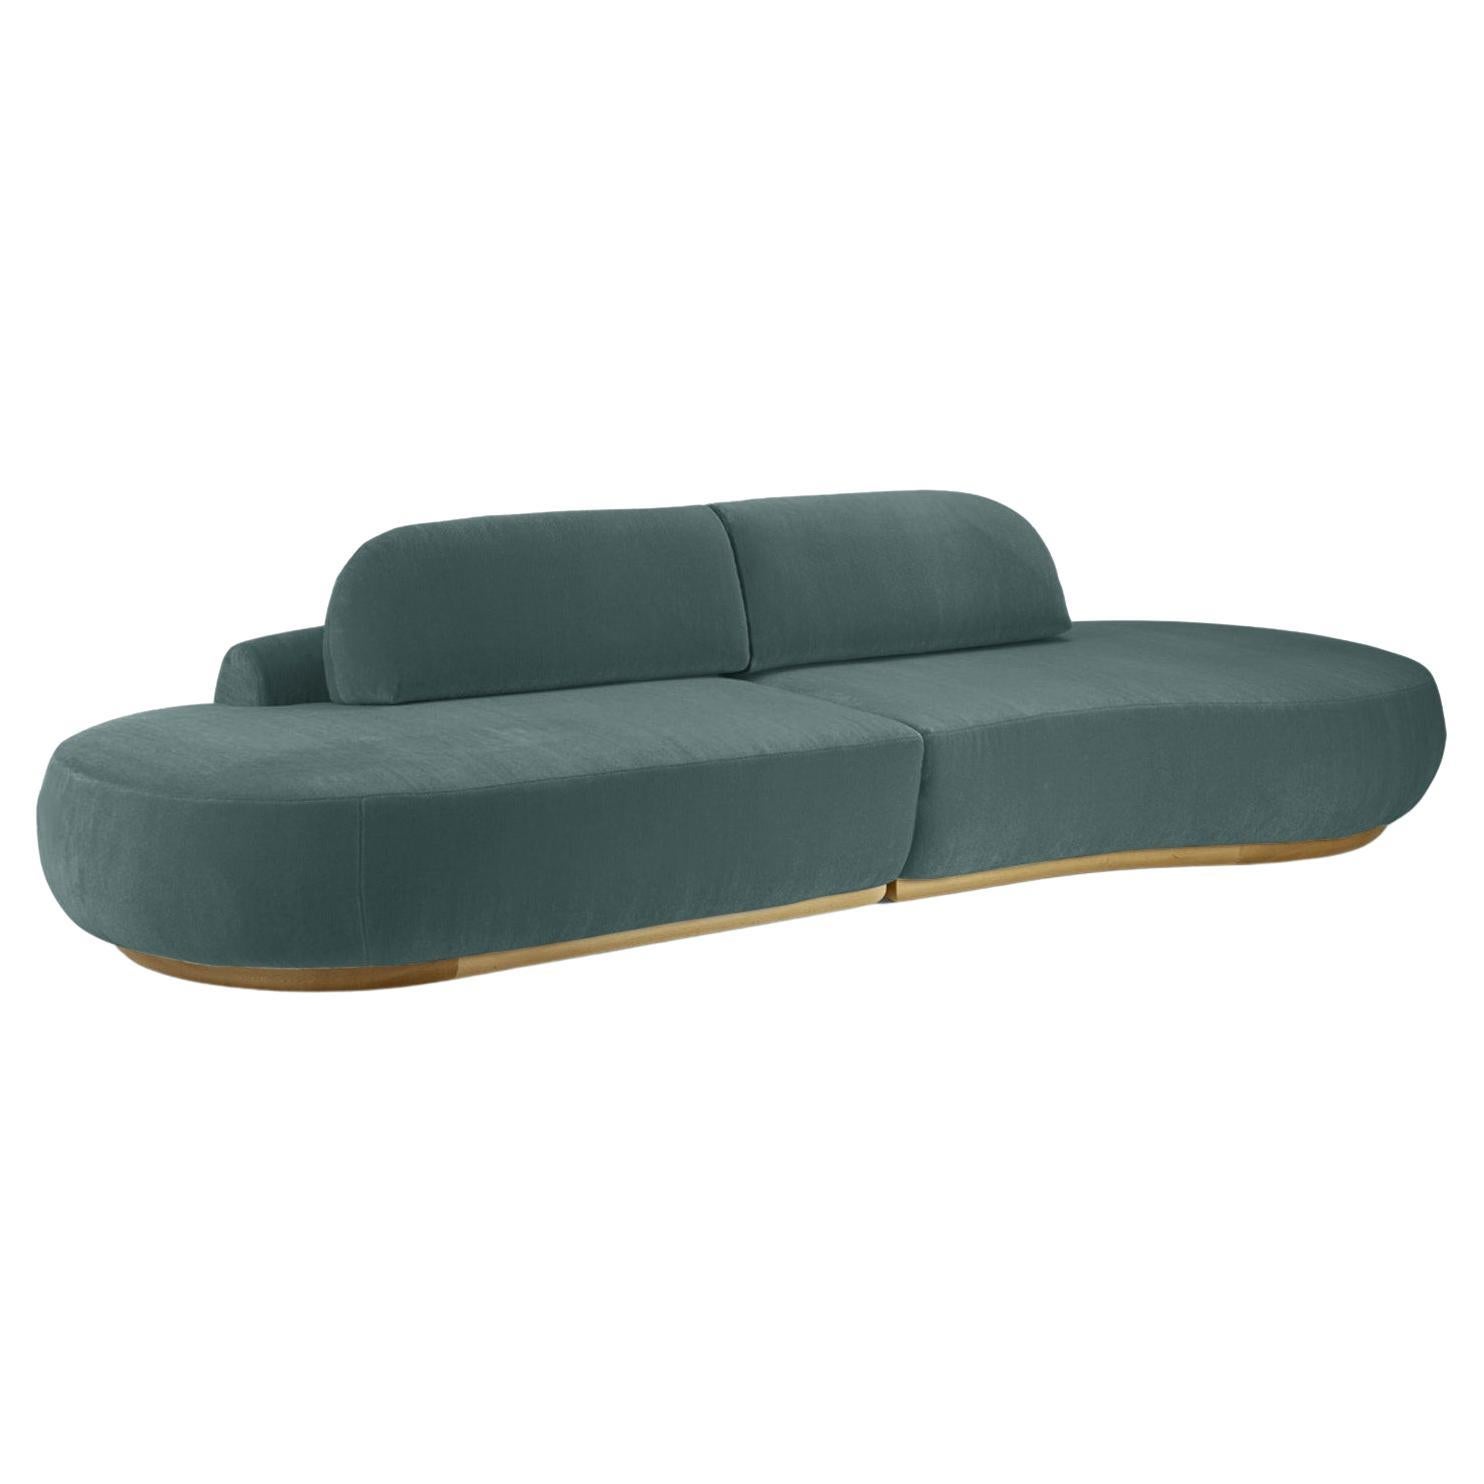 Naked Curved Sectional Sofa, 2 Piece with Natural Oak and Teal